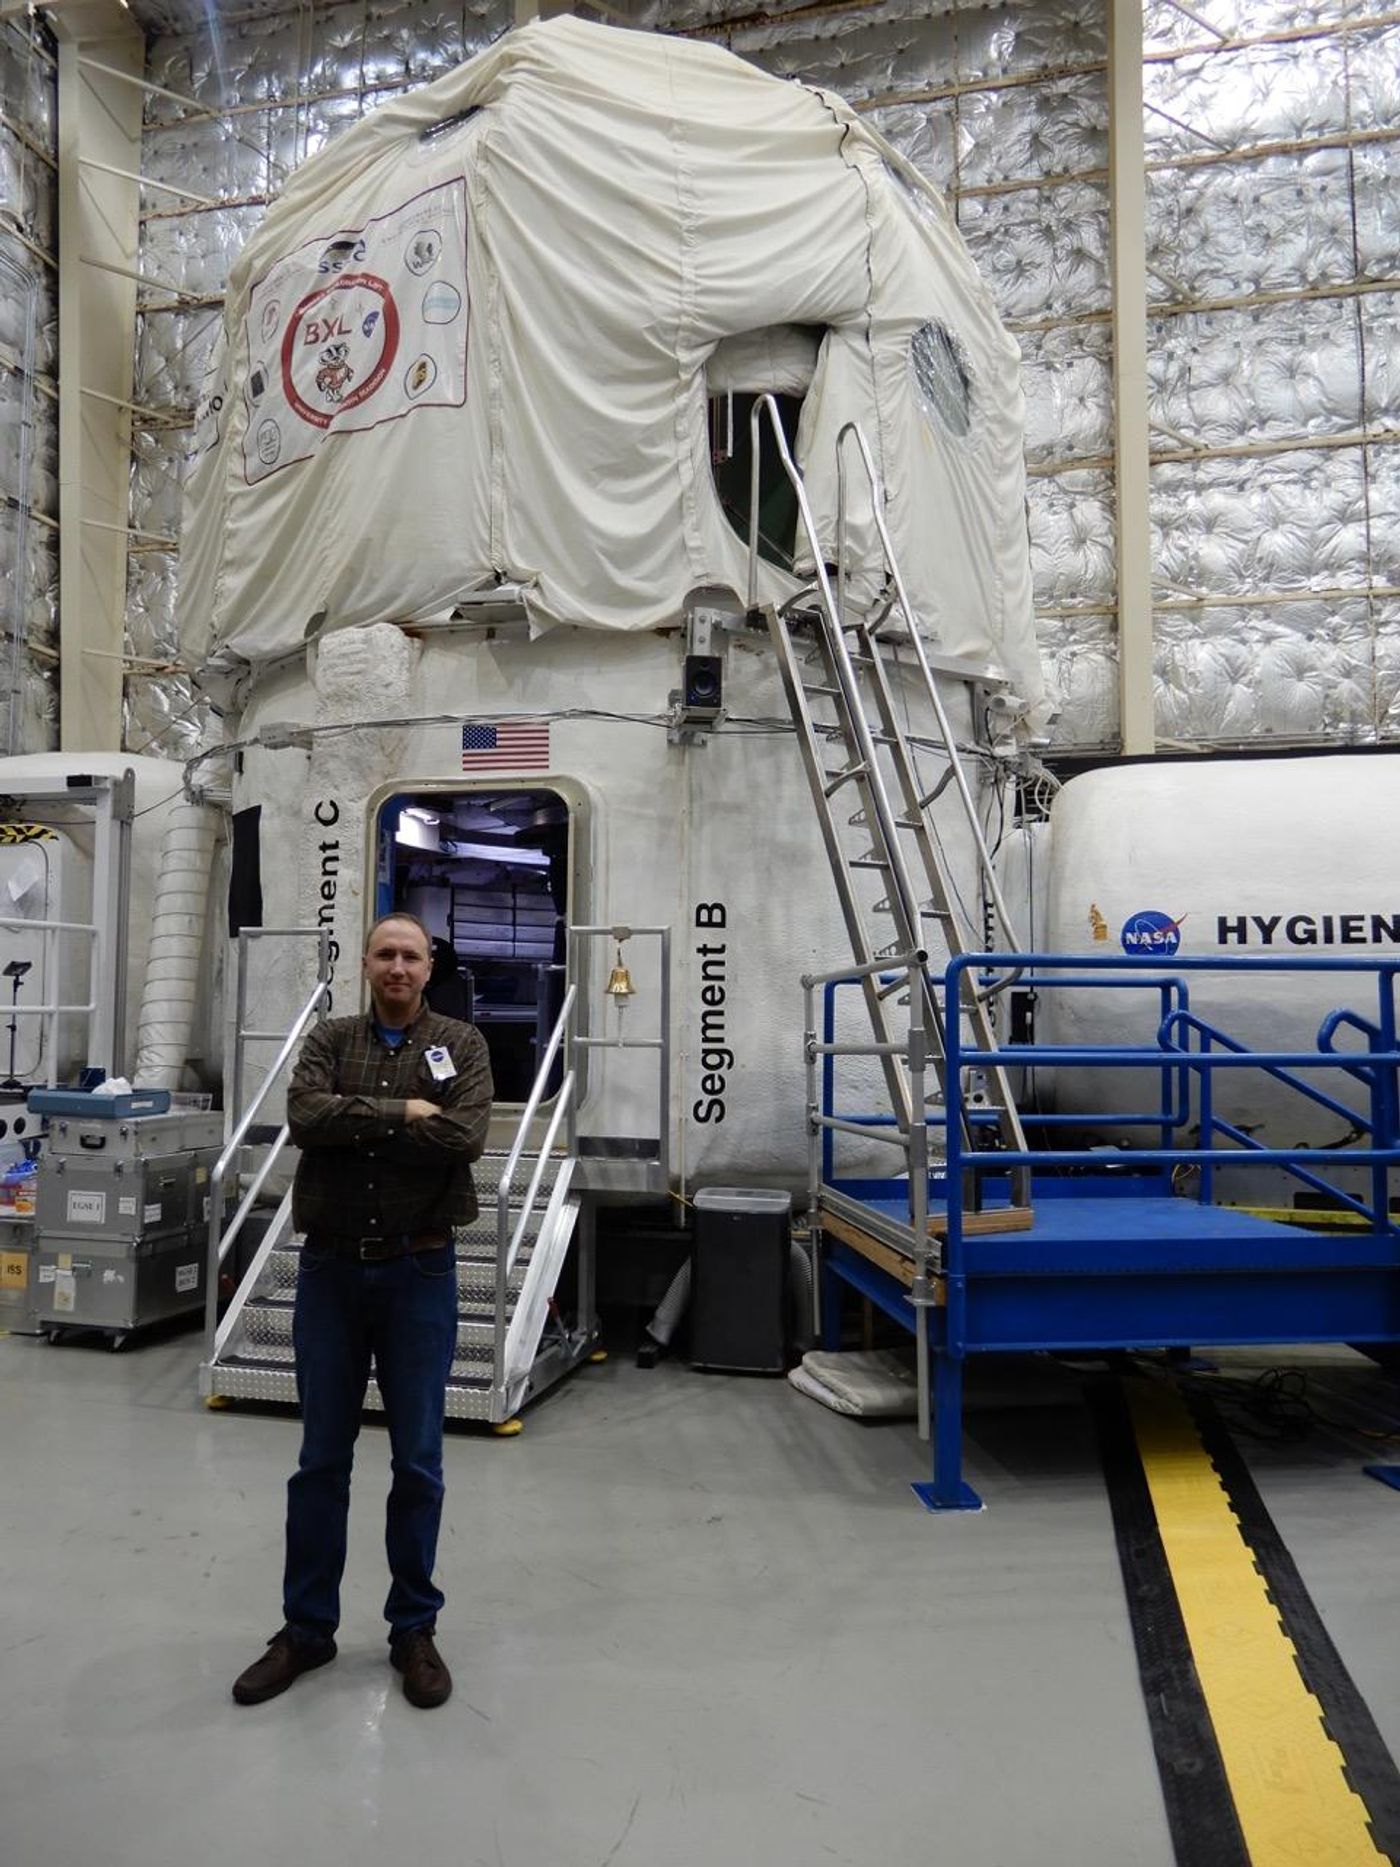 HERA is a testing facility at NASA's Johnson Space Center that will help the space agency learn more about human behavior during long-term space missions.